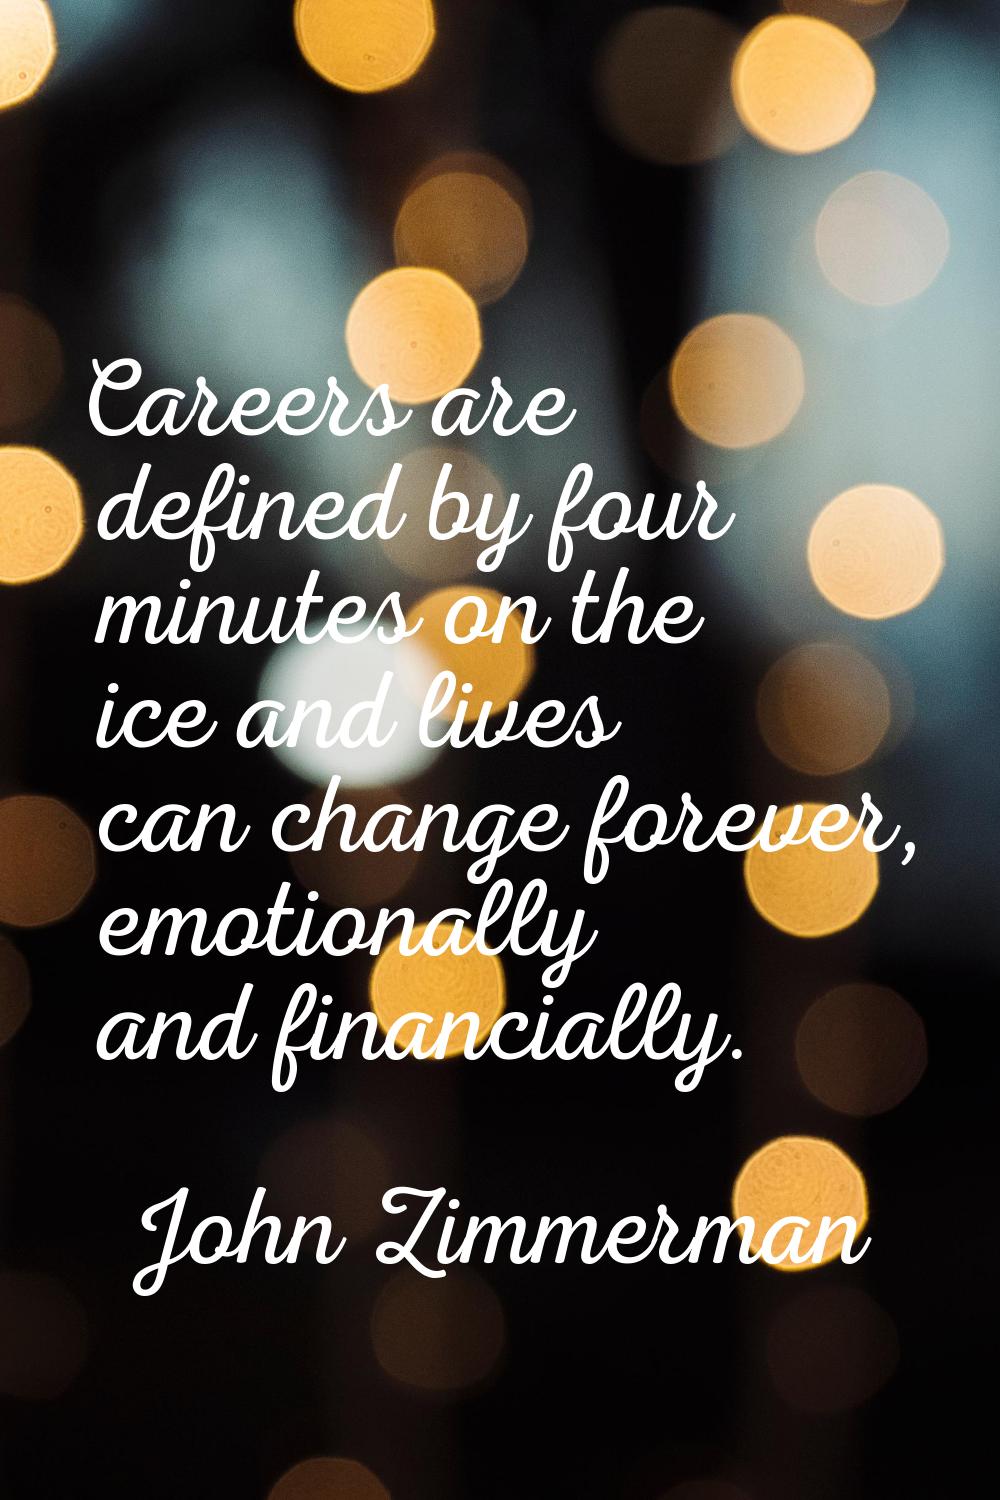 Careers are defined by four minutes on the ice and lives can change forever, emotionally and financ